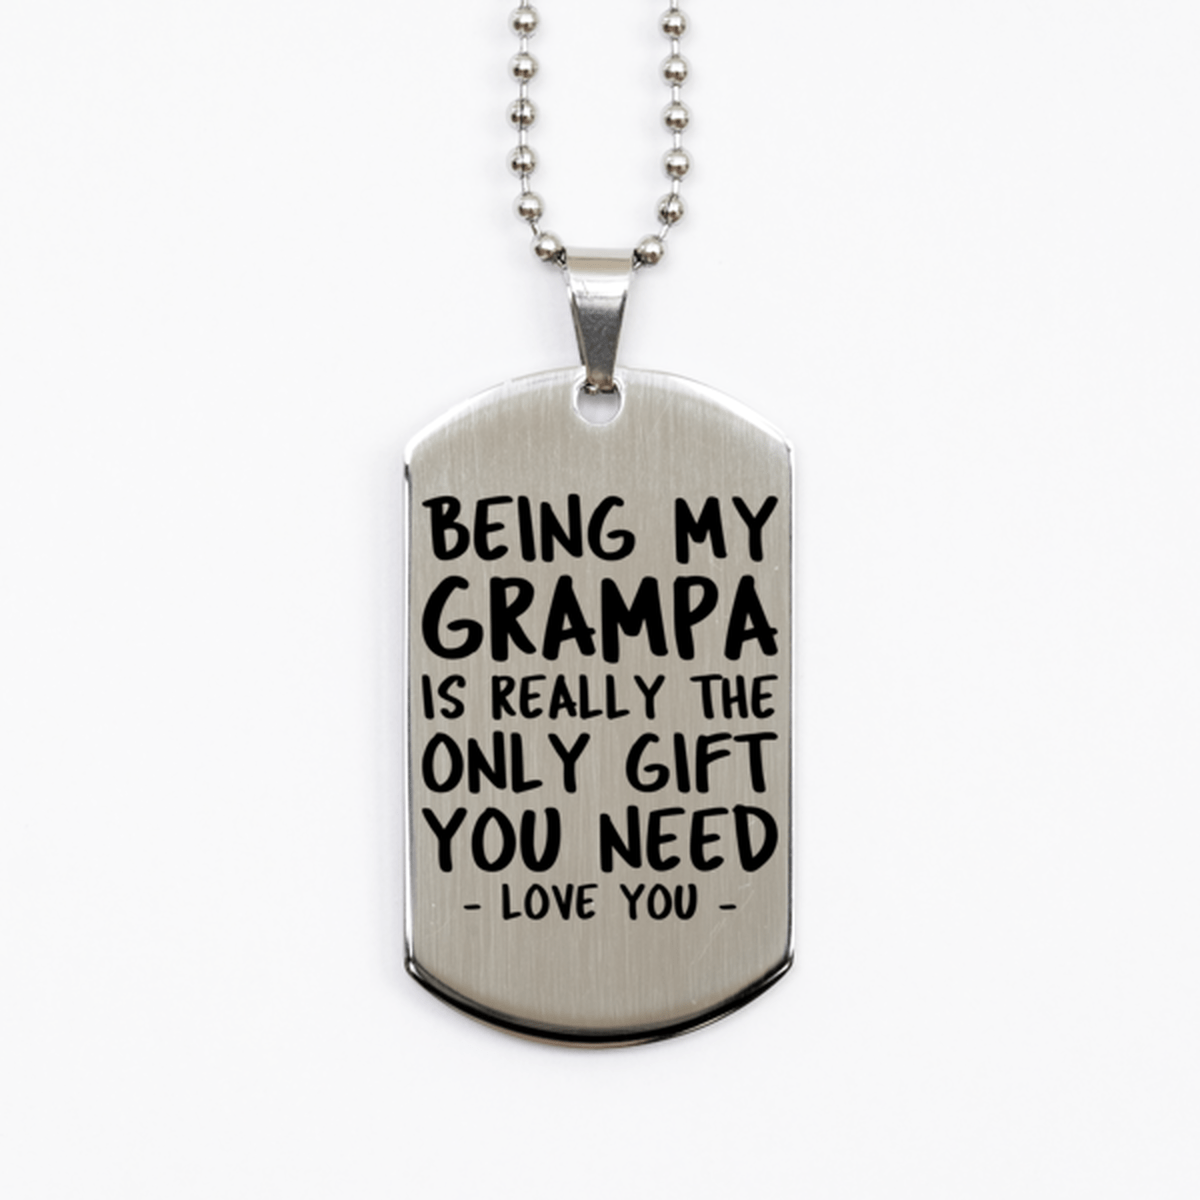 Funny Grampa Silver Dog Tag Necklace, Being My Grampa Is Really the Only Gift You Need, Best Birthday Gifts for Grampa